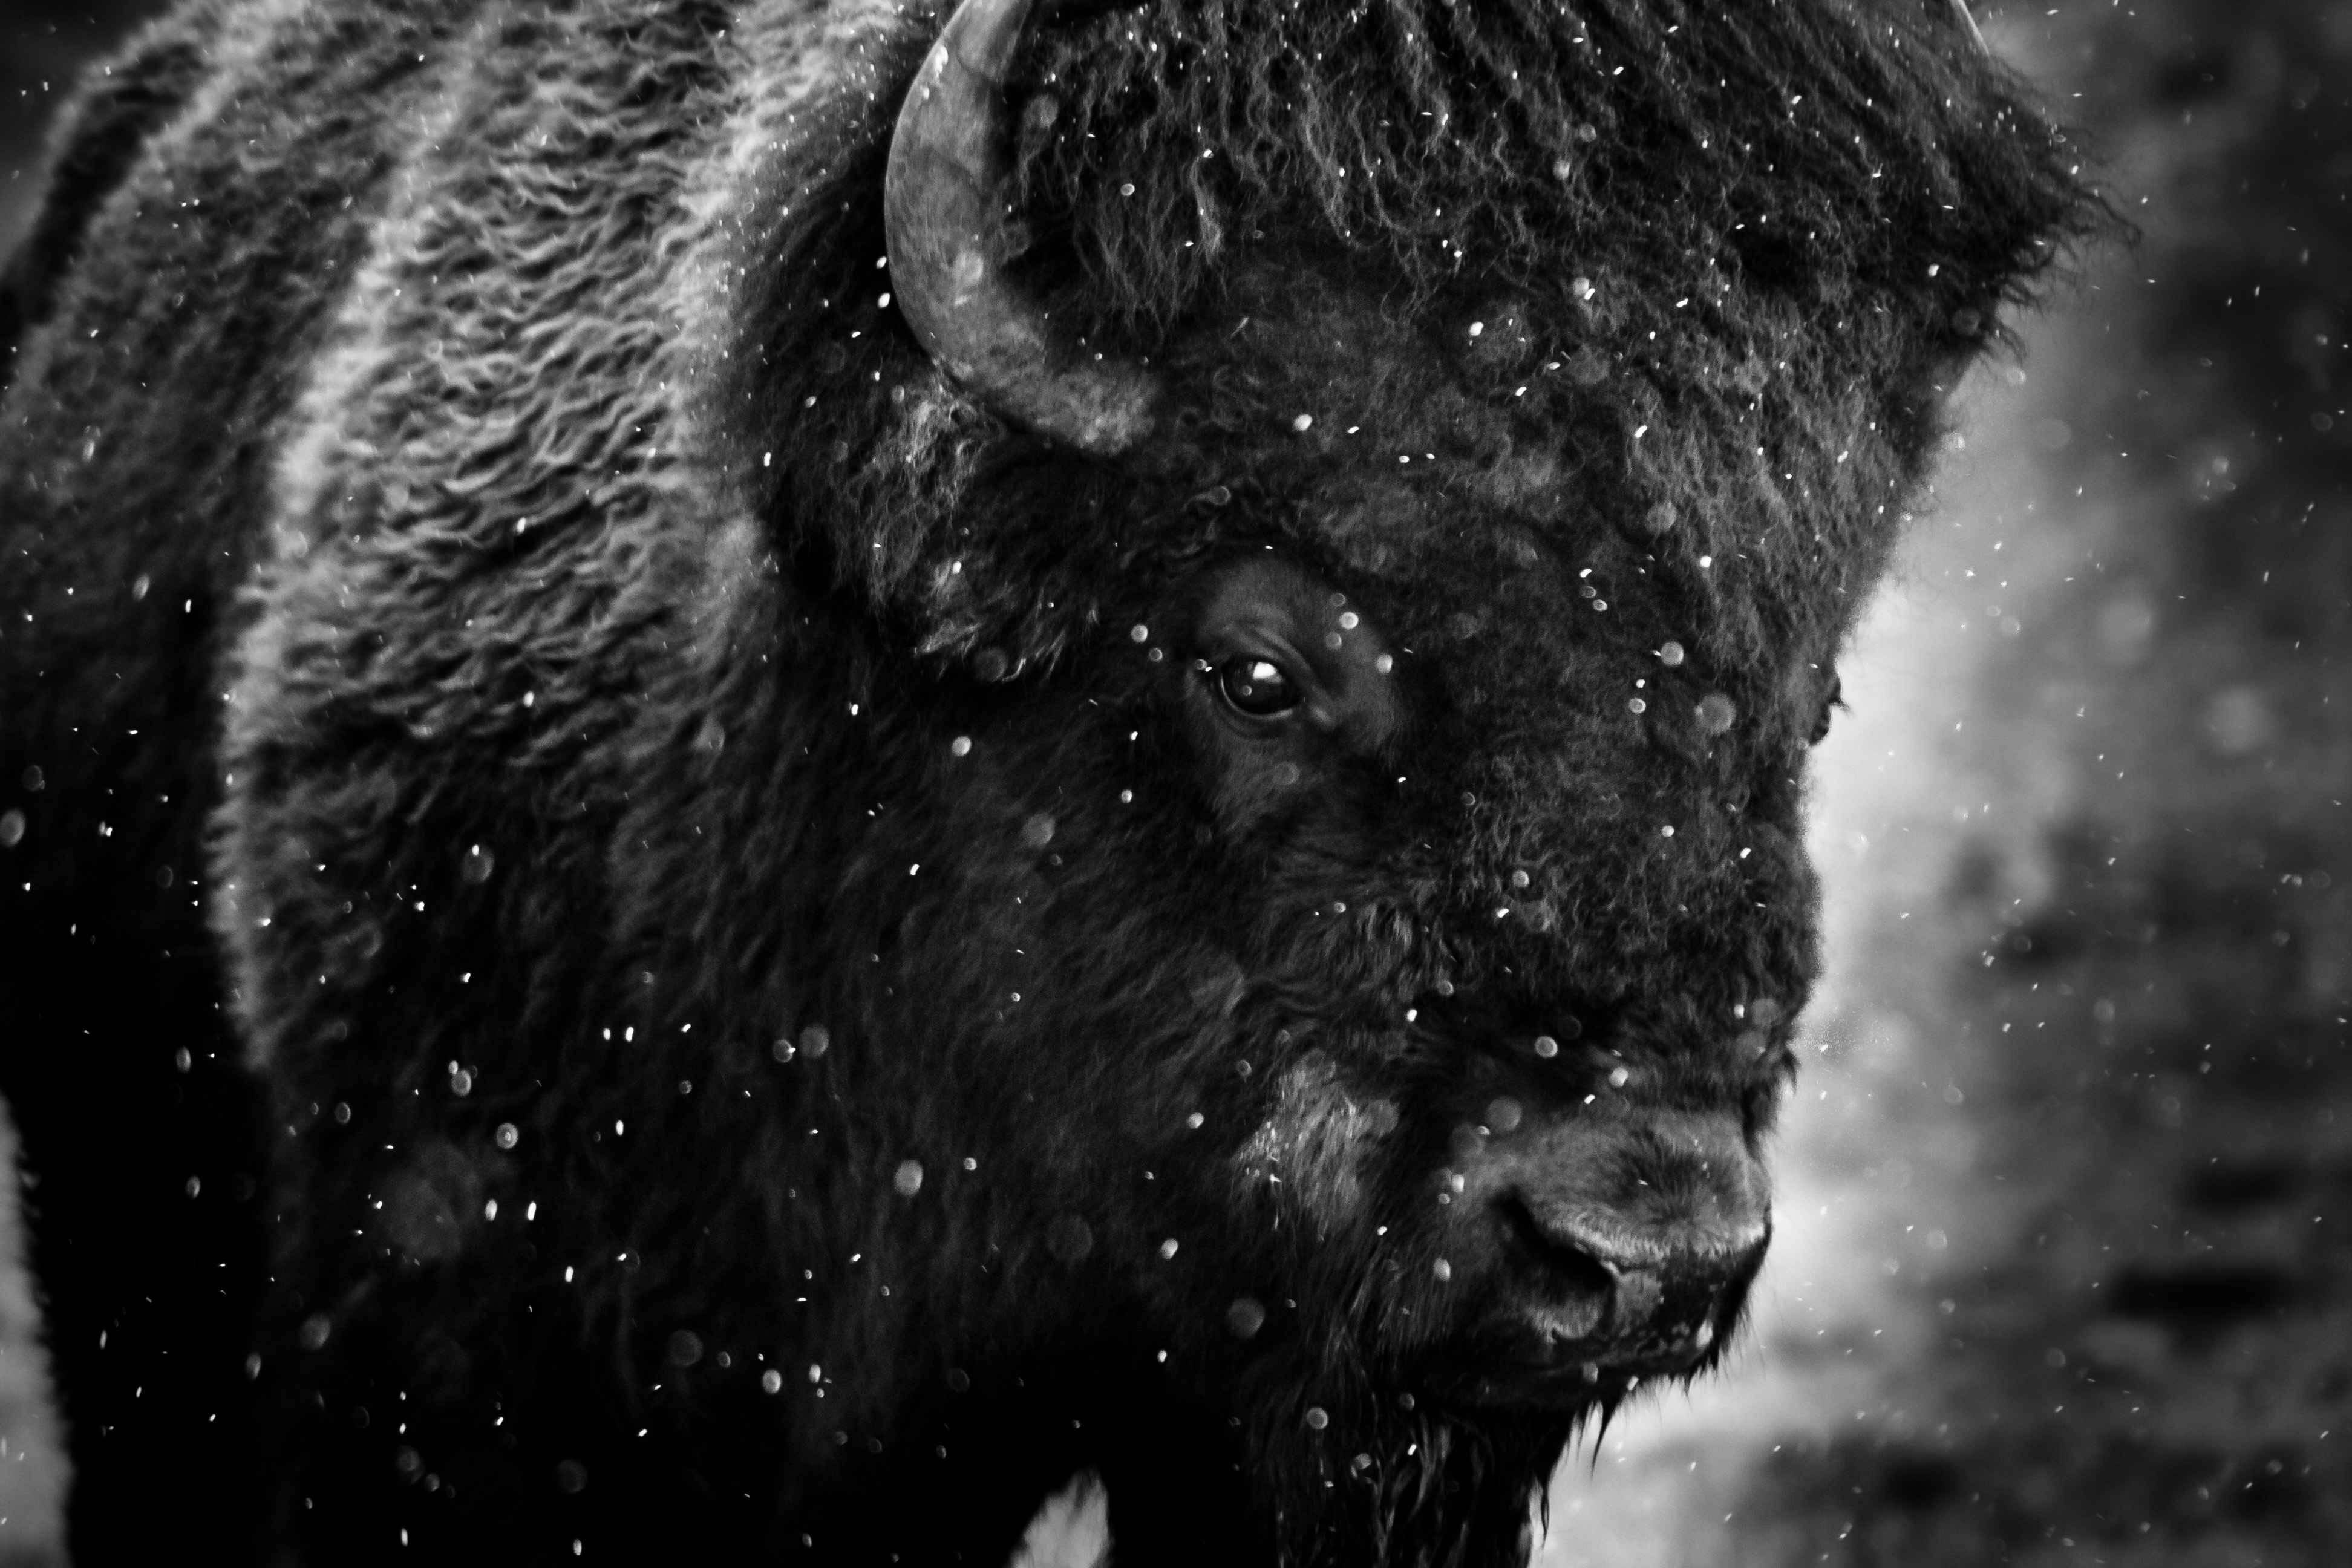 4: Bison in Snow